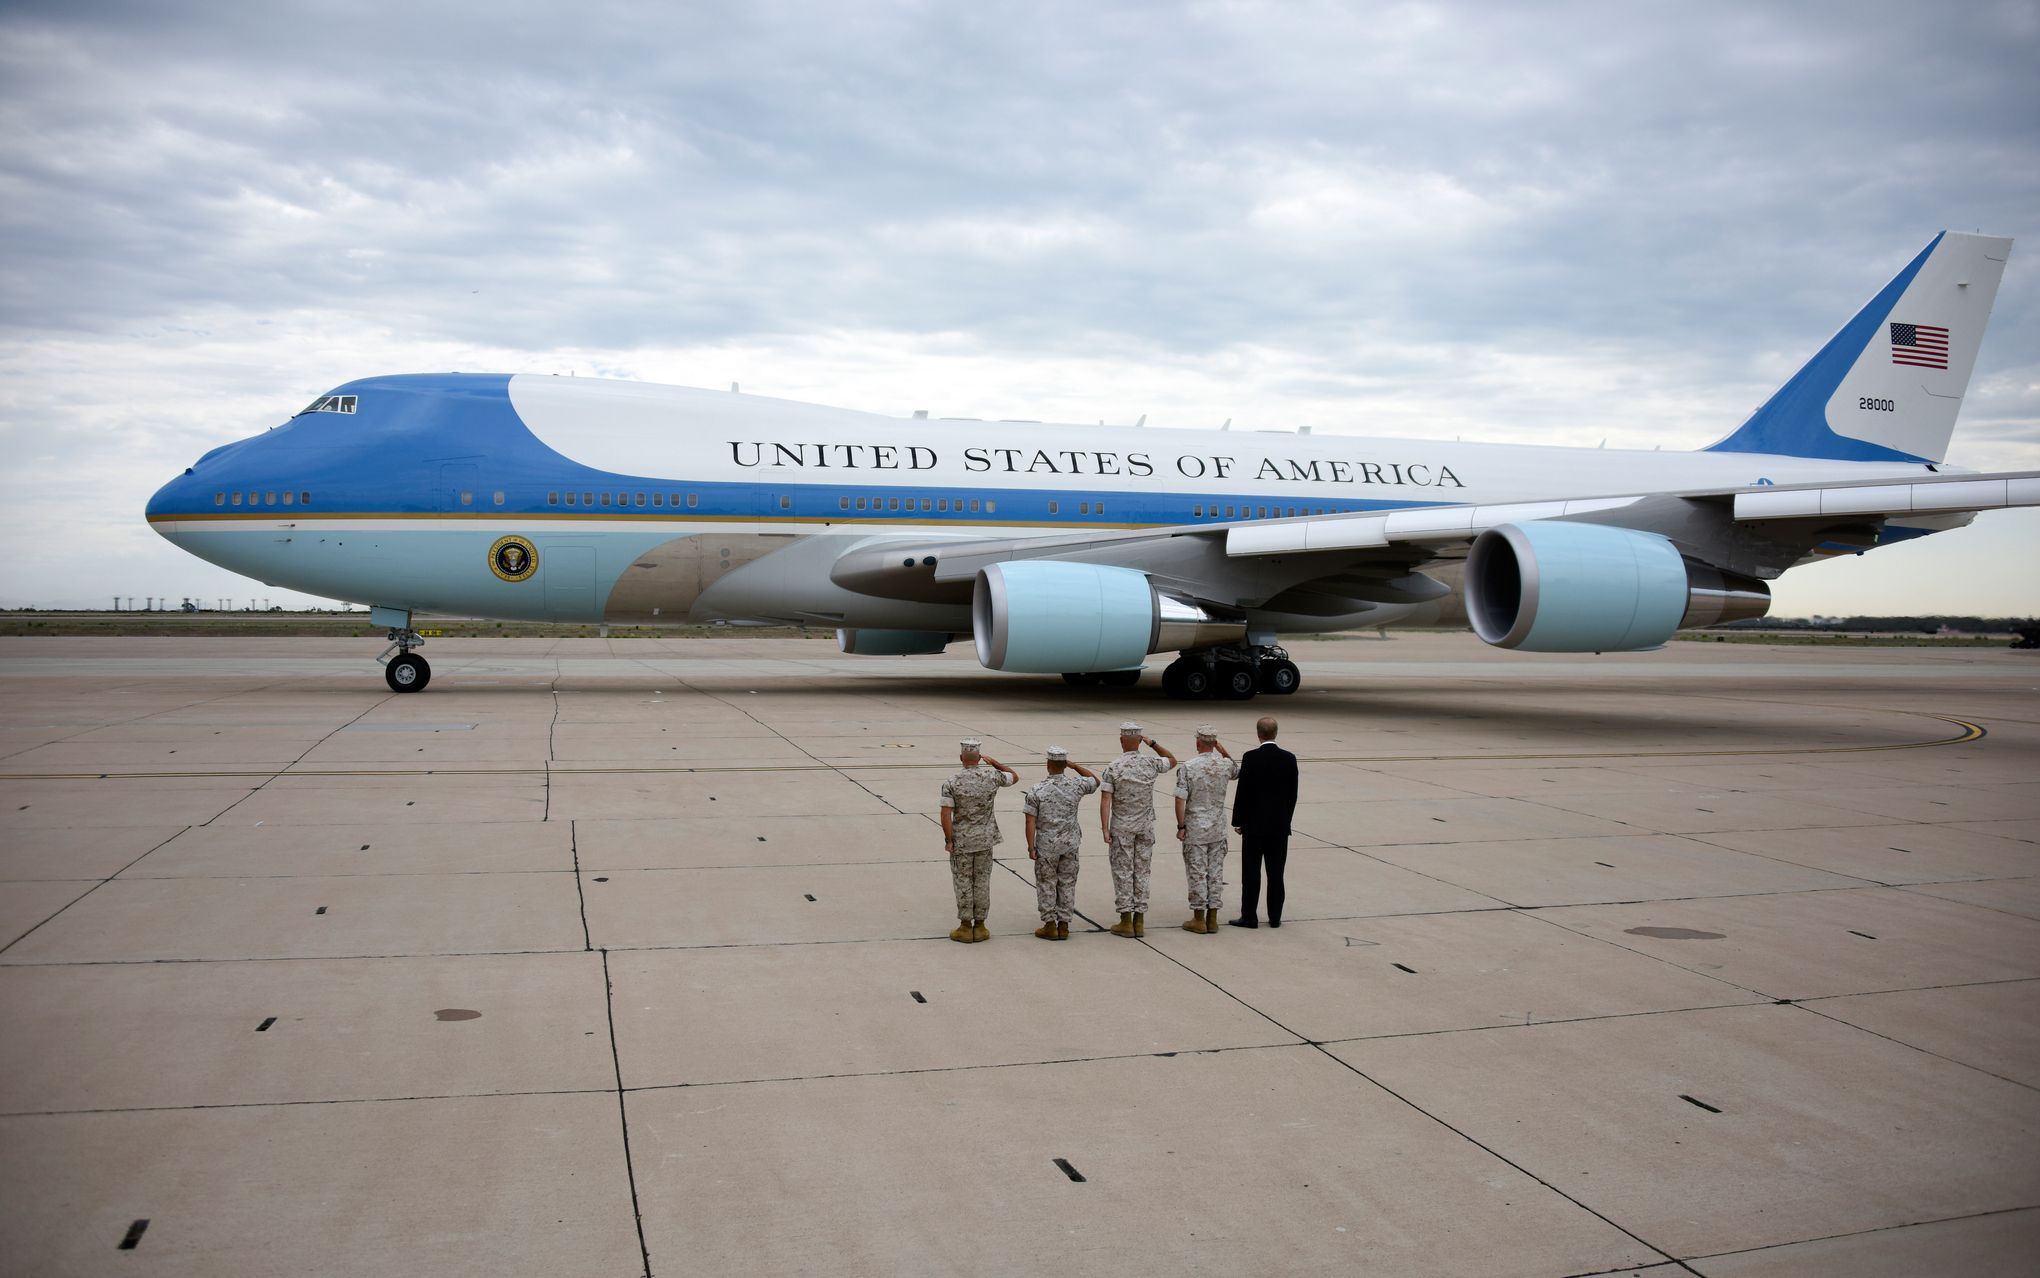 Next Air Force One will fly faster, farther with advanced technology